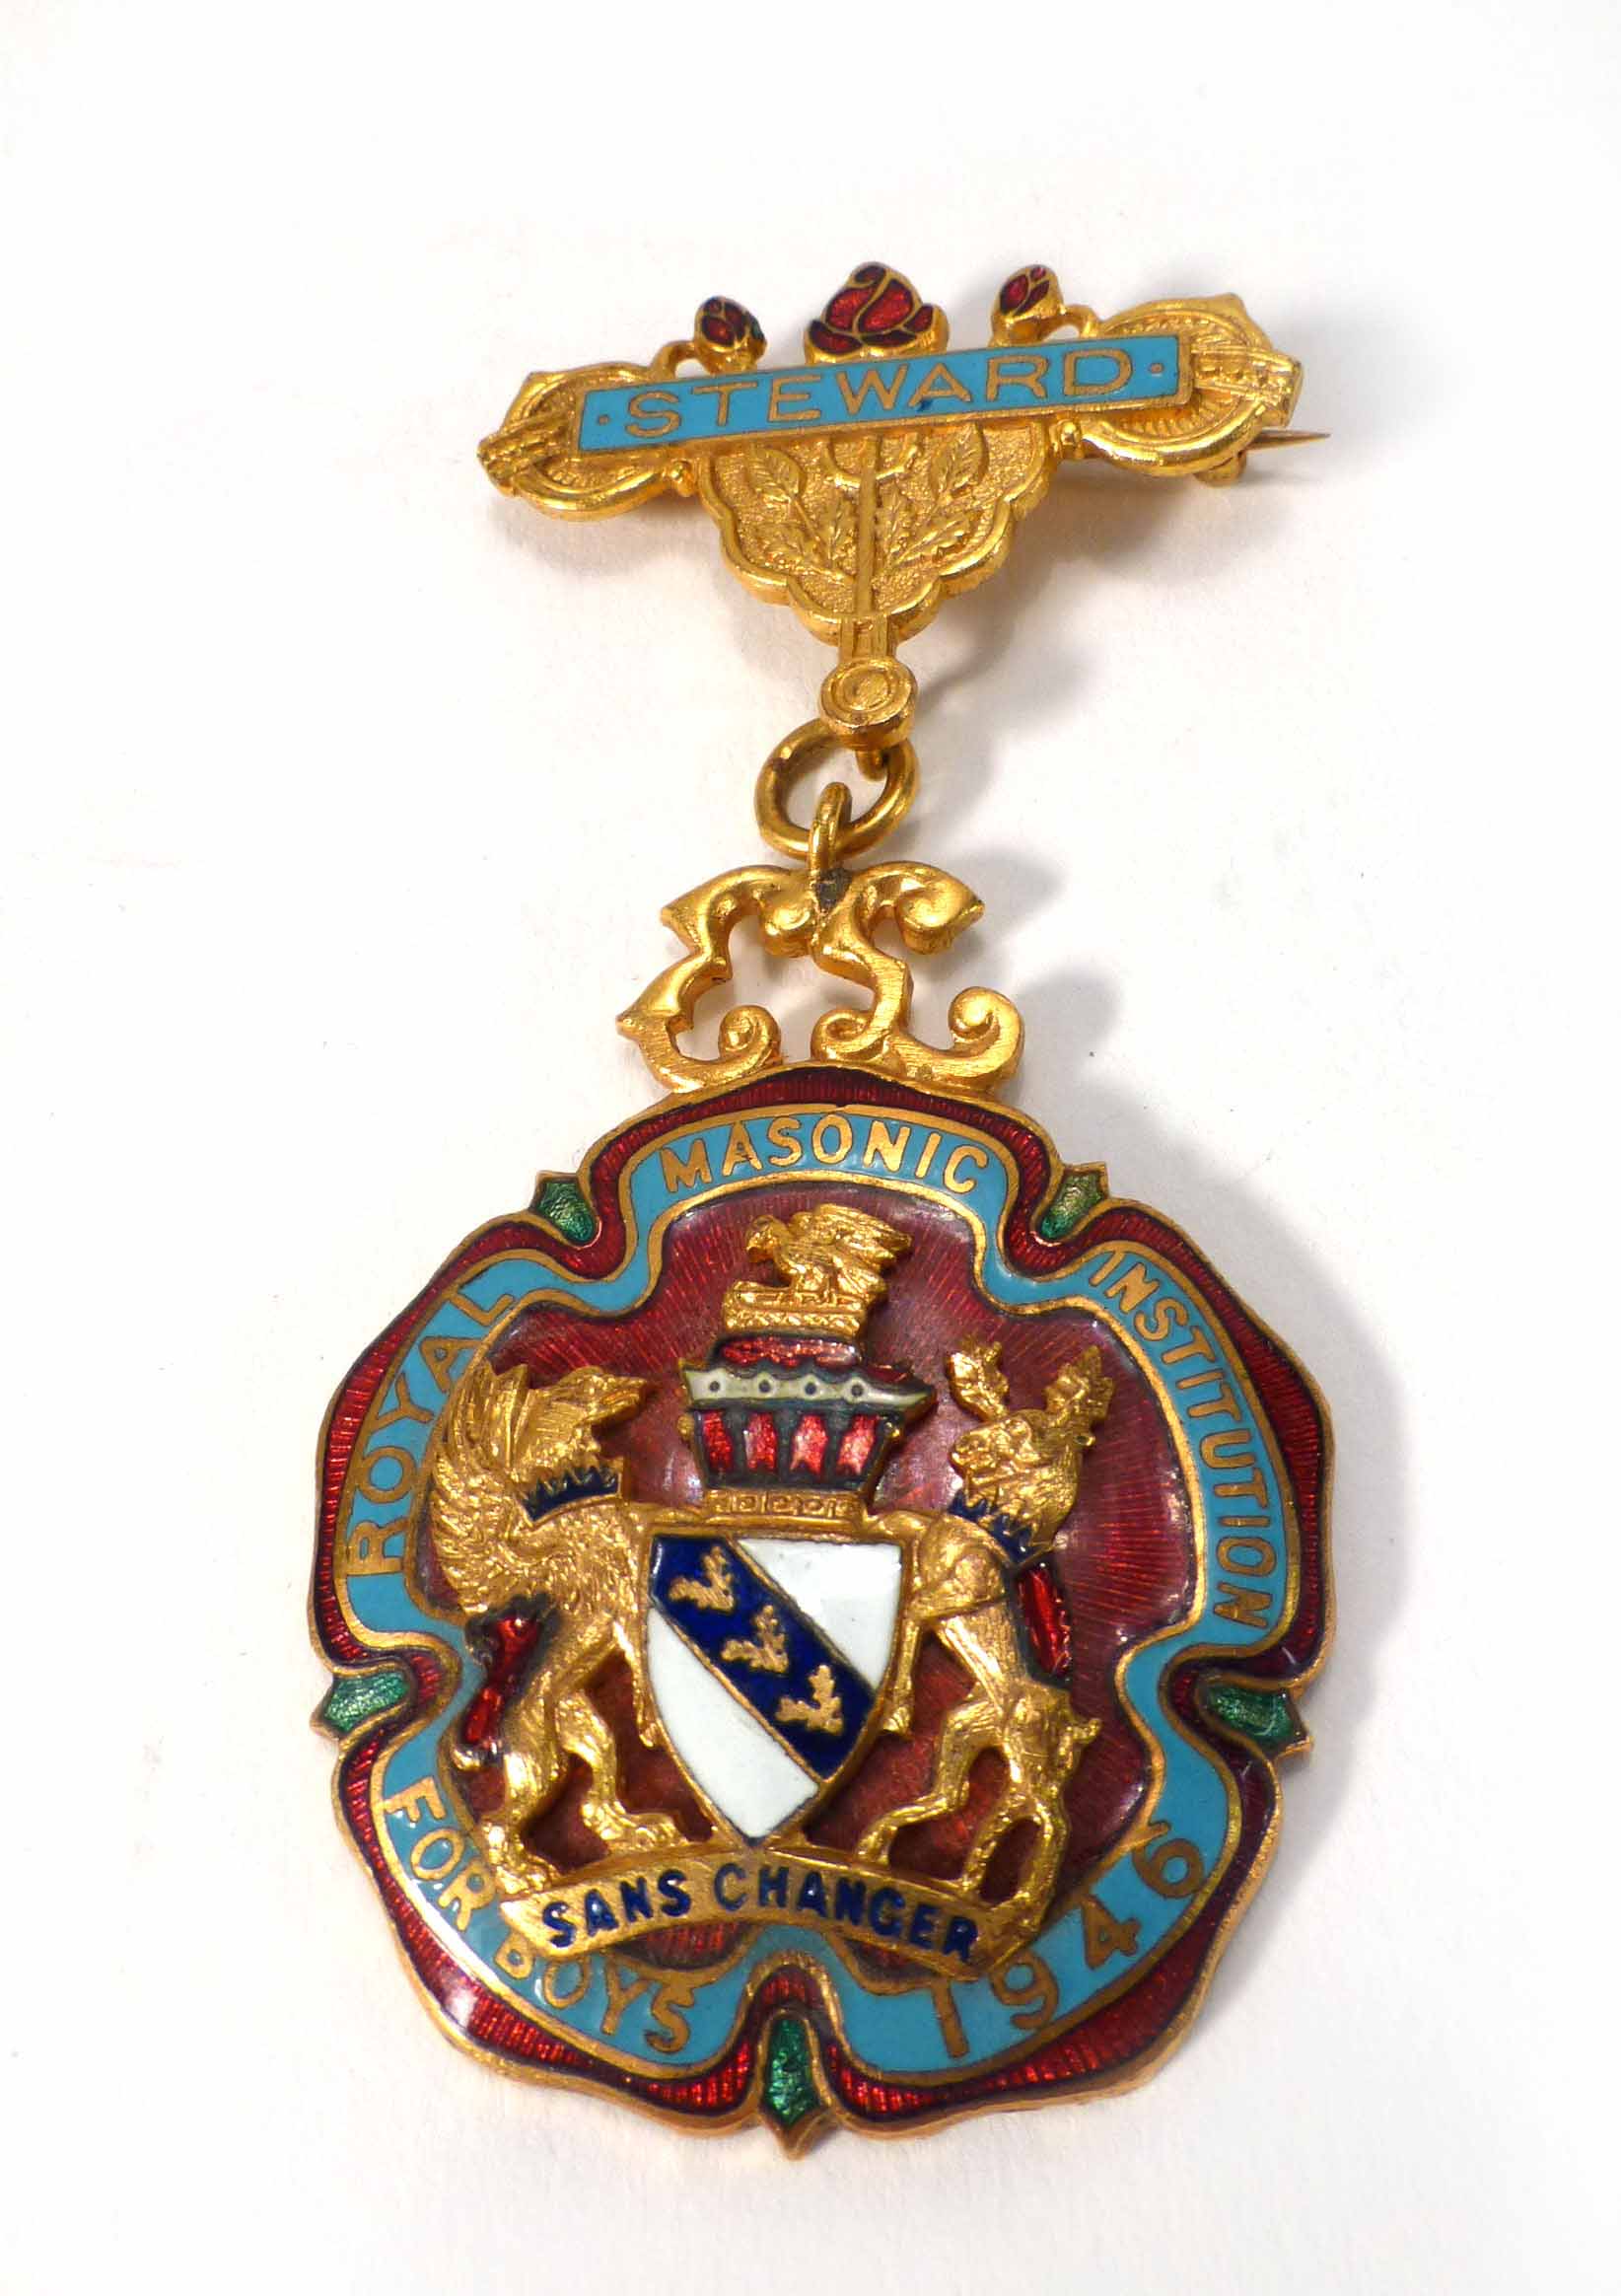 A 'Royal Masonic Institution for Boys' gilt metal and enameled Stewards jewel by George Kenning &